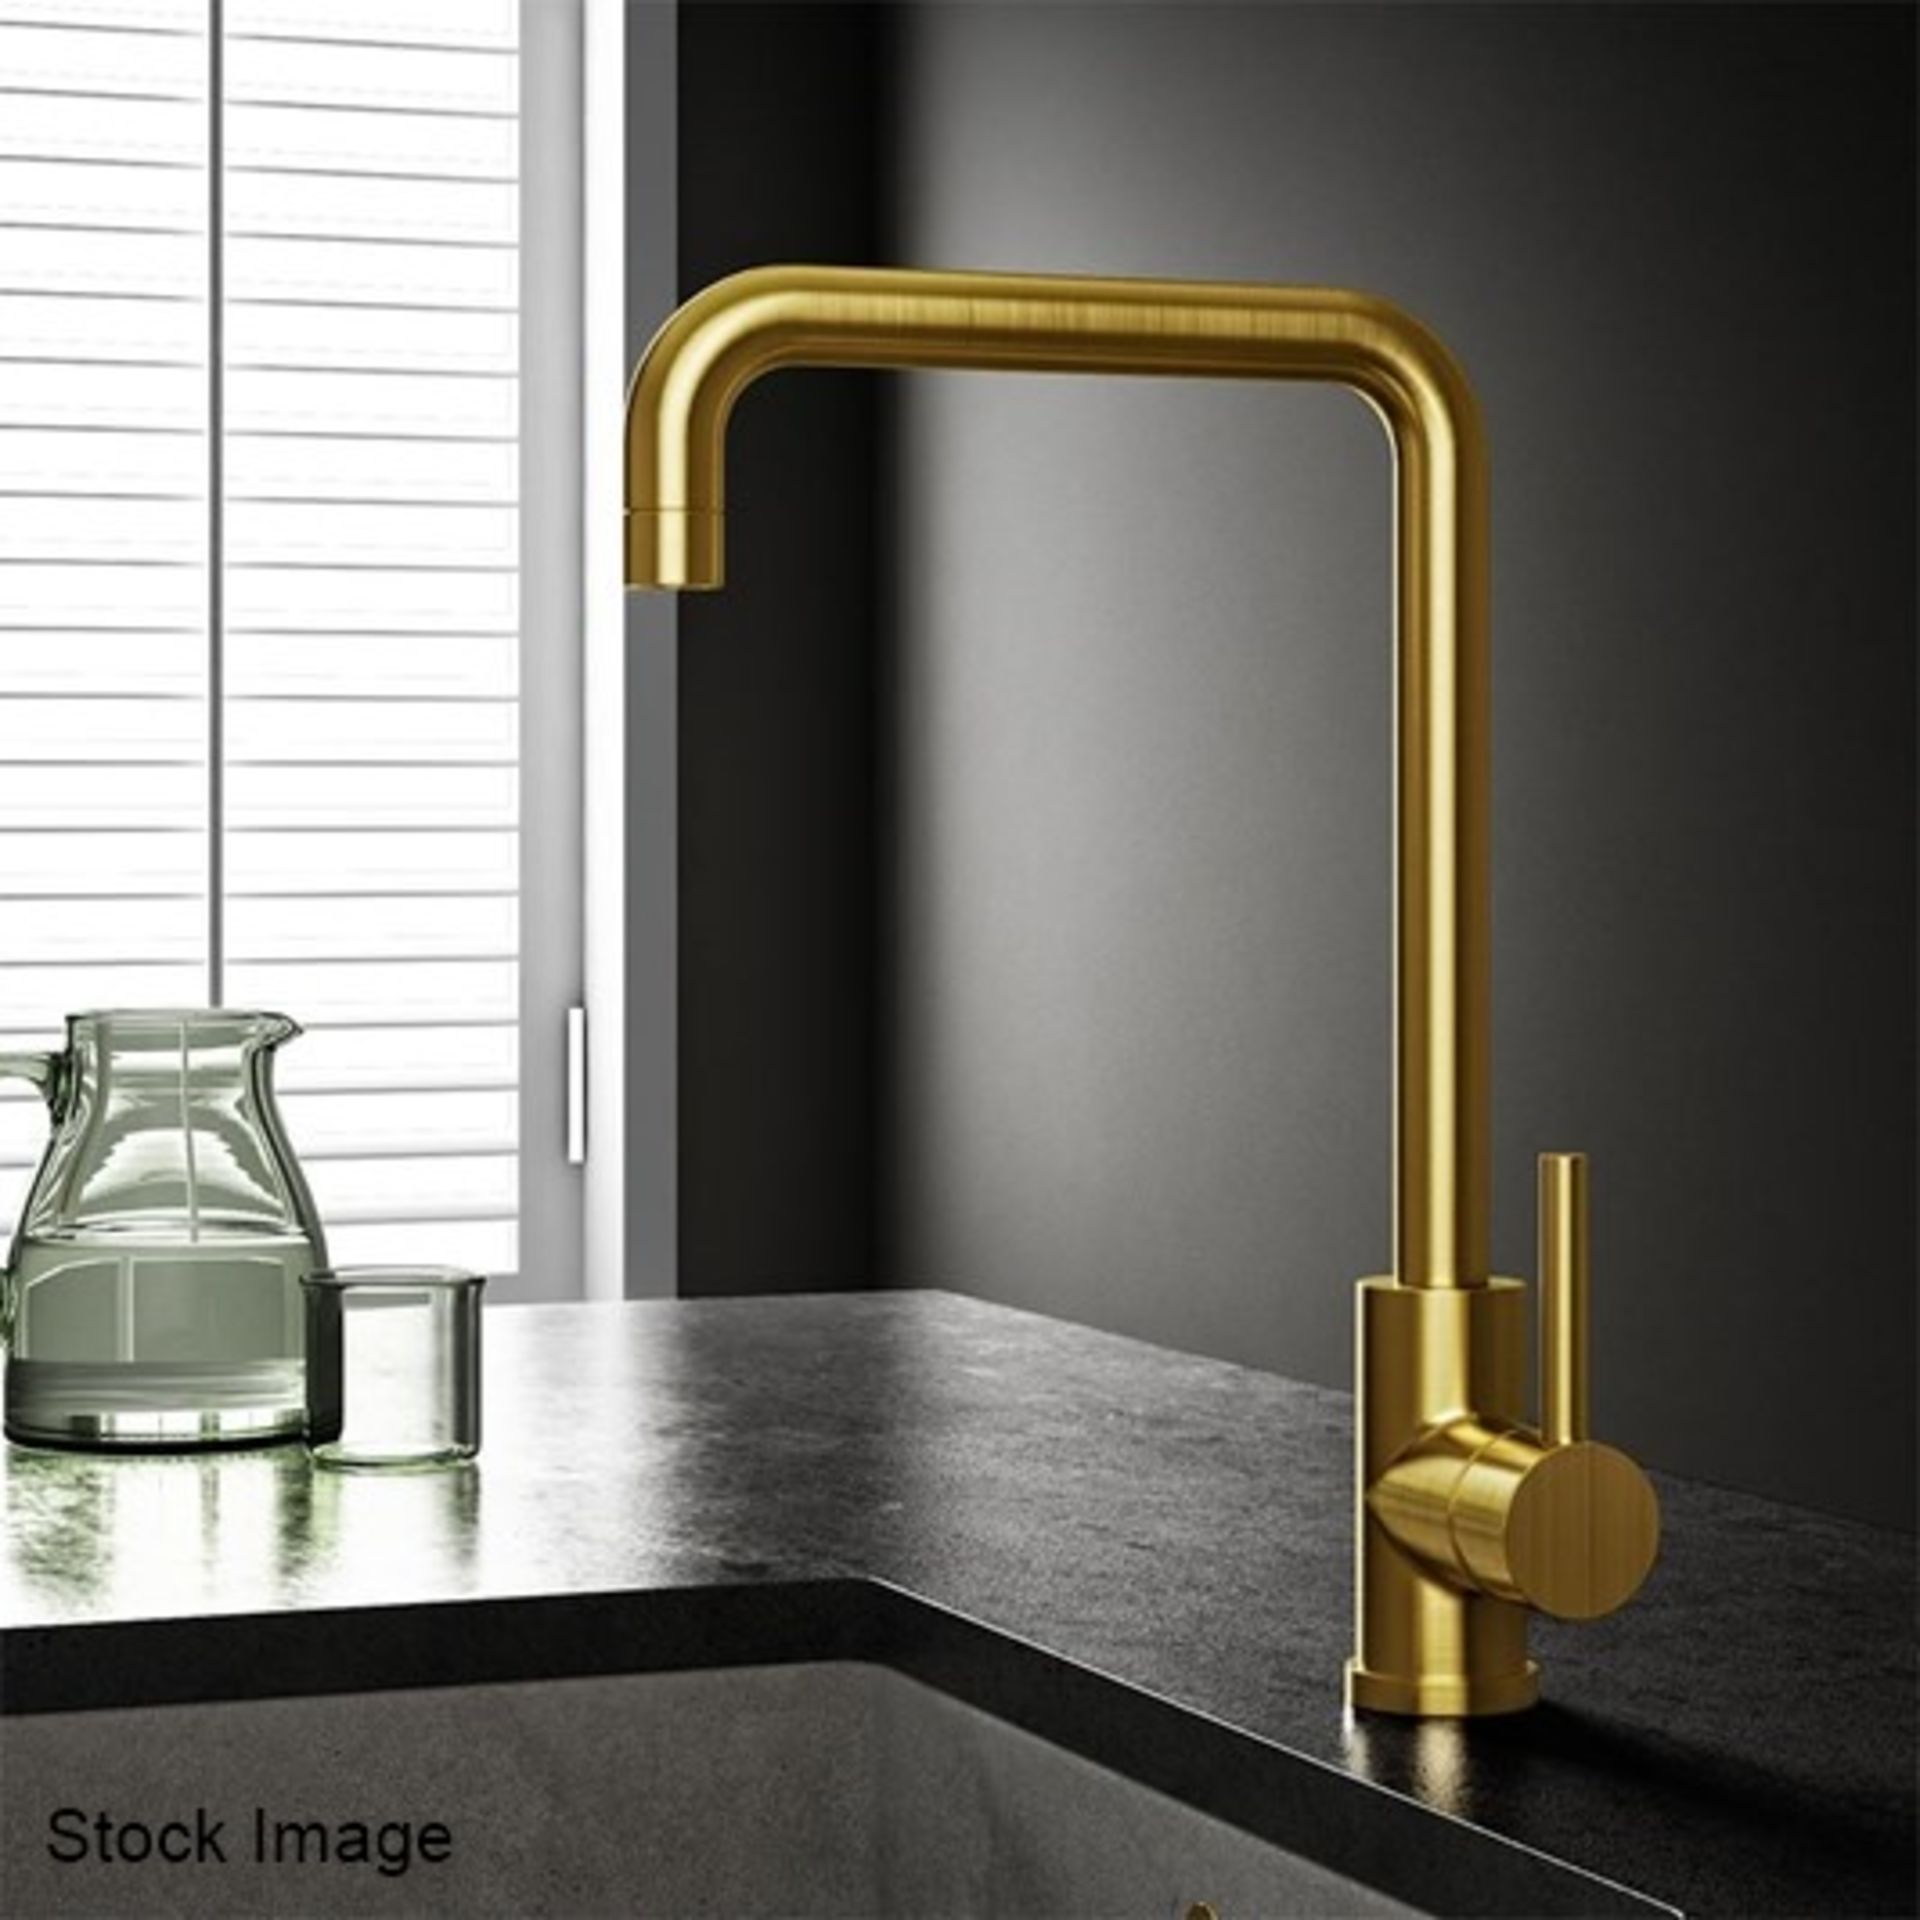 1 x CASSELLIE Brushed Gold Single Lever Mono Kitchen Sink Mixer Tap - Ref: KTA035 - New & Boxed